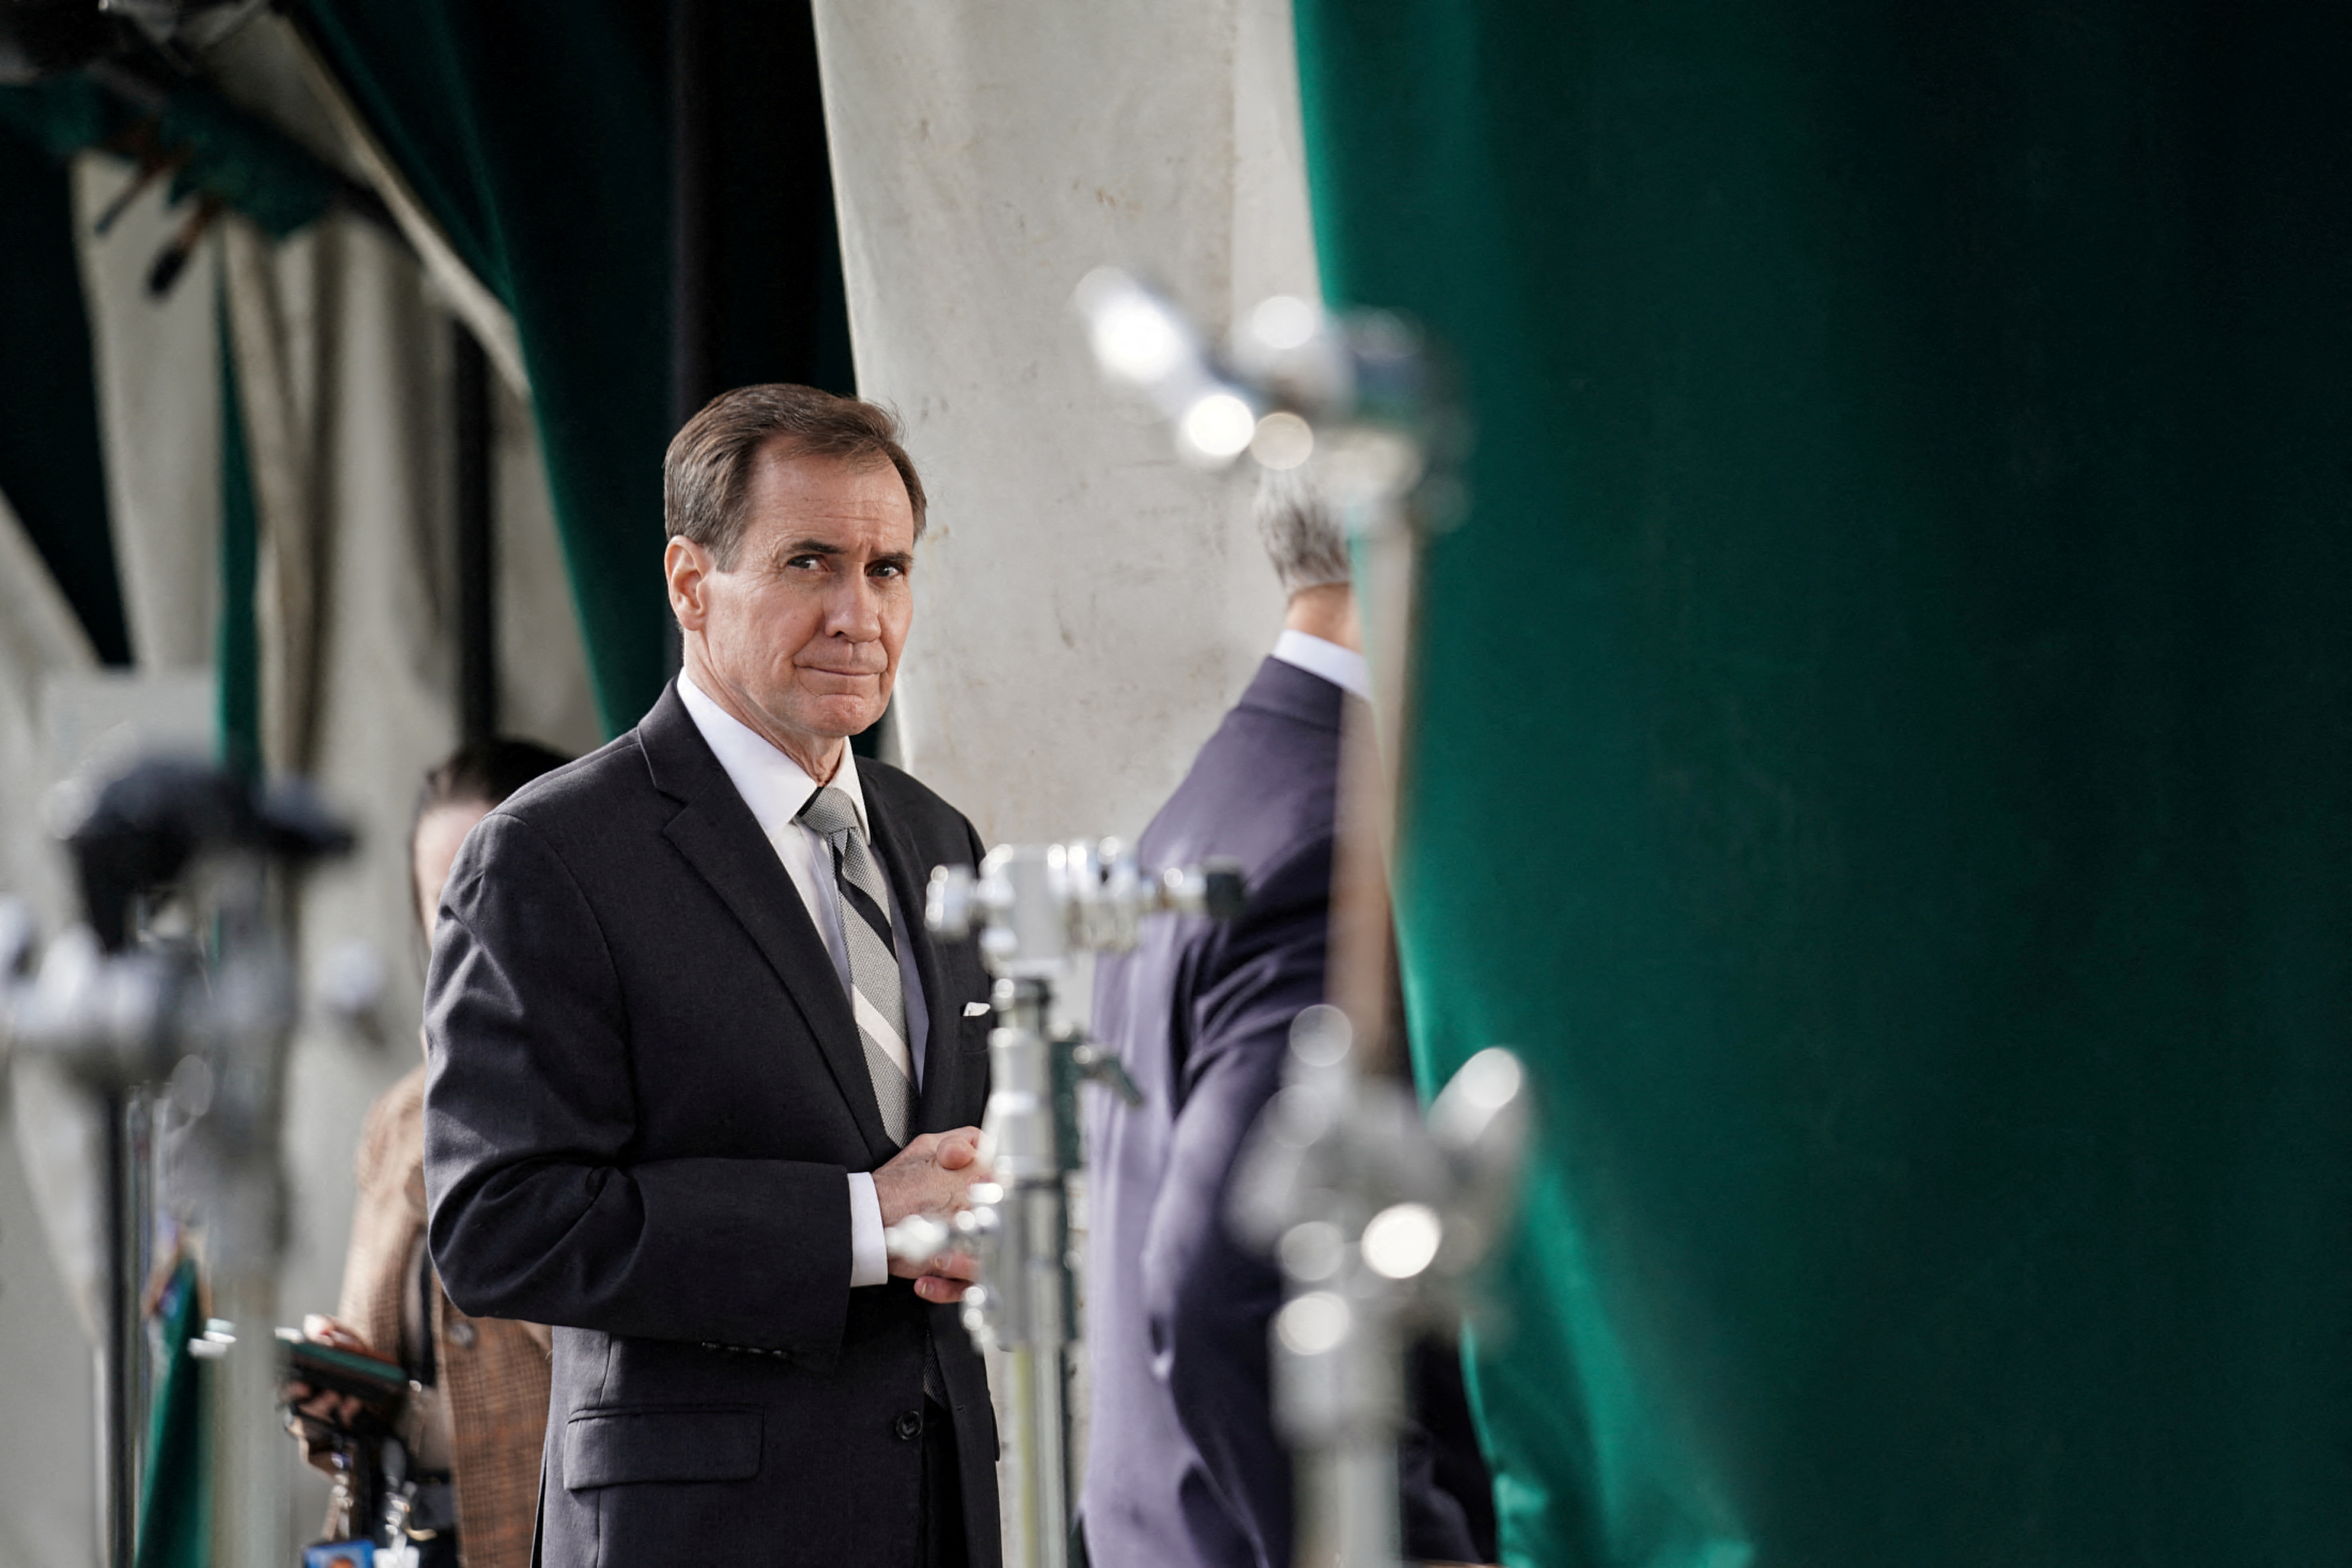 National Security Council Coordinator for Strategic Communications John Kirby speaks to reporters at the White House in Washington